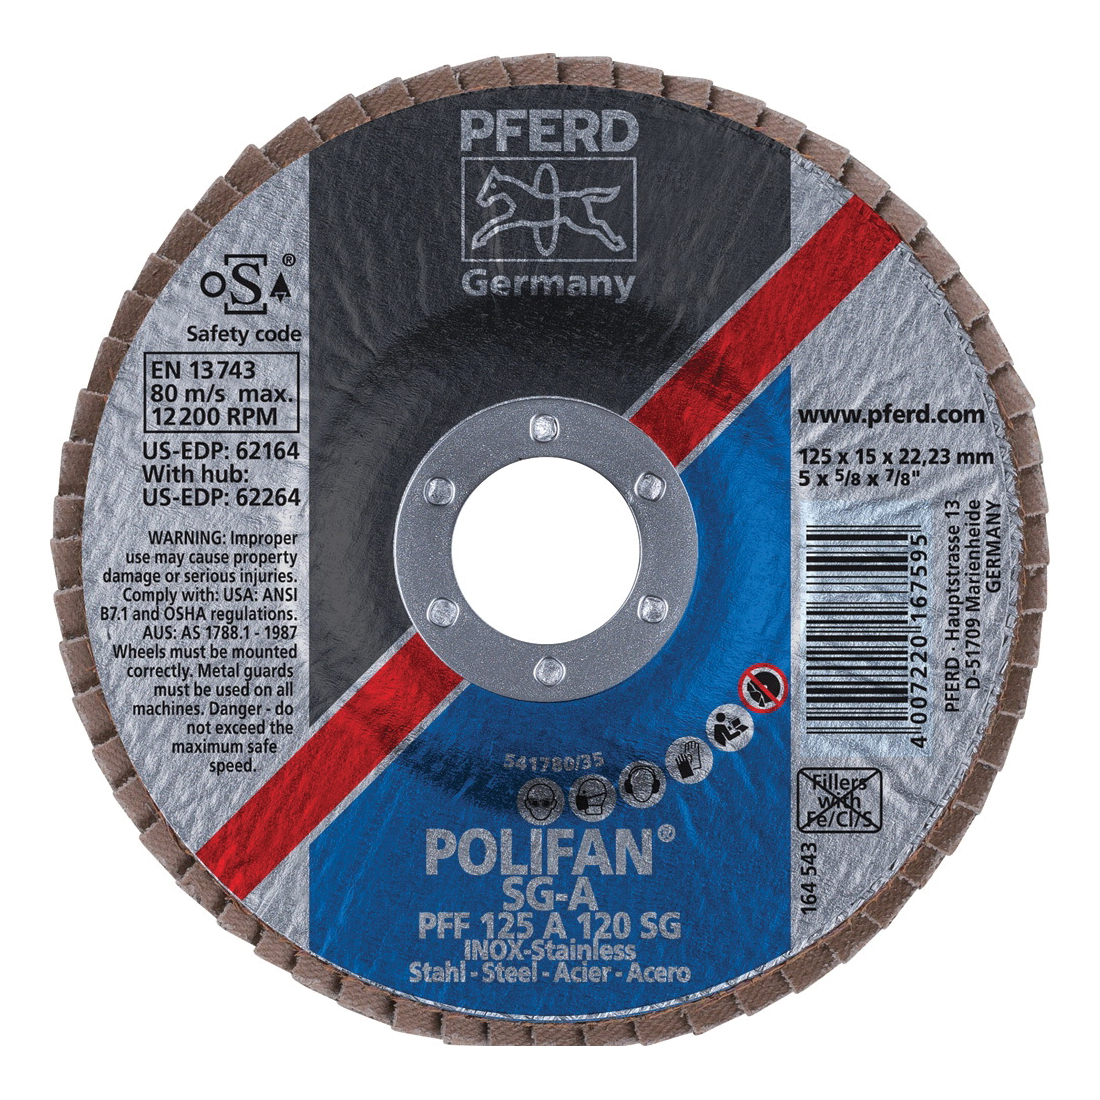 PFERD Polifan® 62164 Performance Line SG A Unthreaded Coated Abrasive Flap Disc, 5 in Dia, 7/8 in Center Hole, 120 Grit, Aluminum Oxide Abrasive, Type 27 Flat Disc